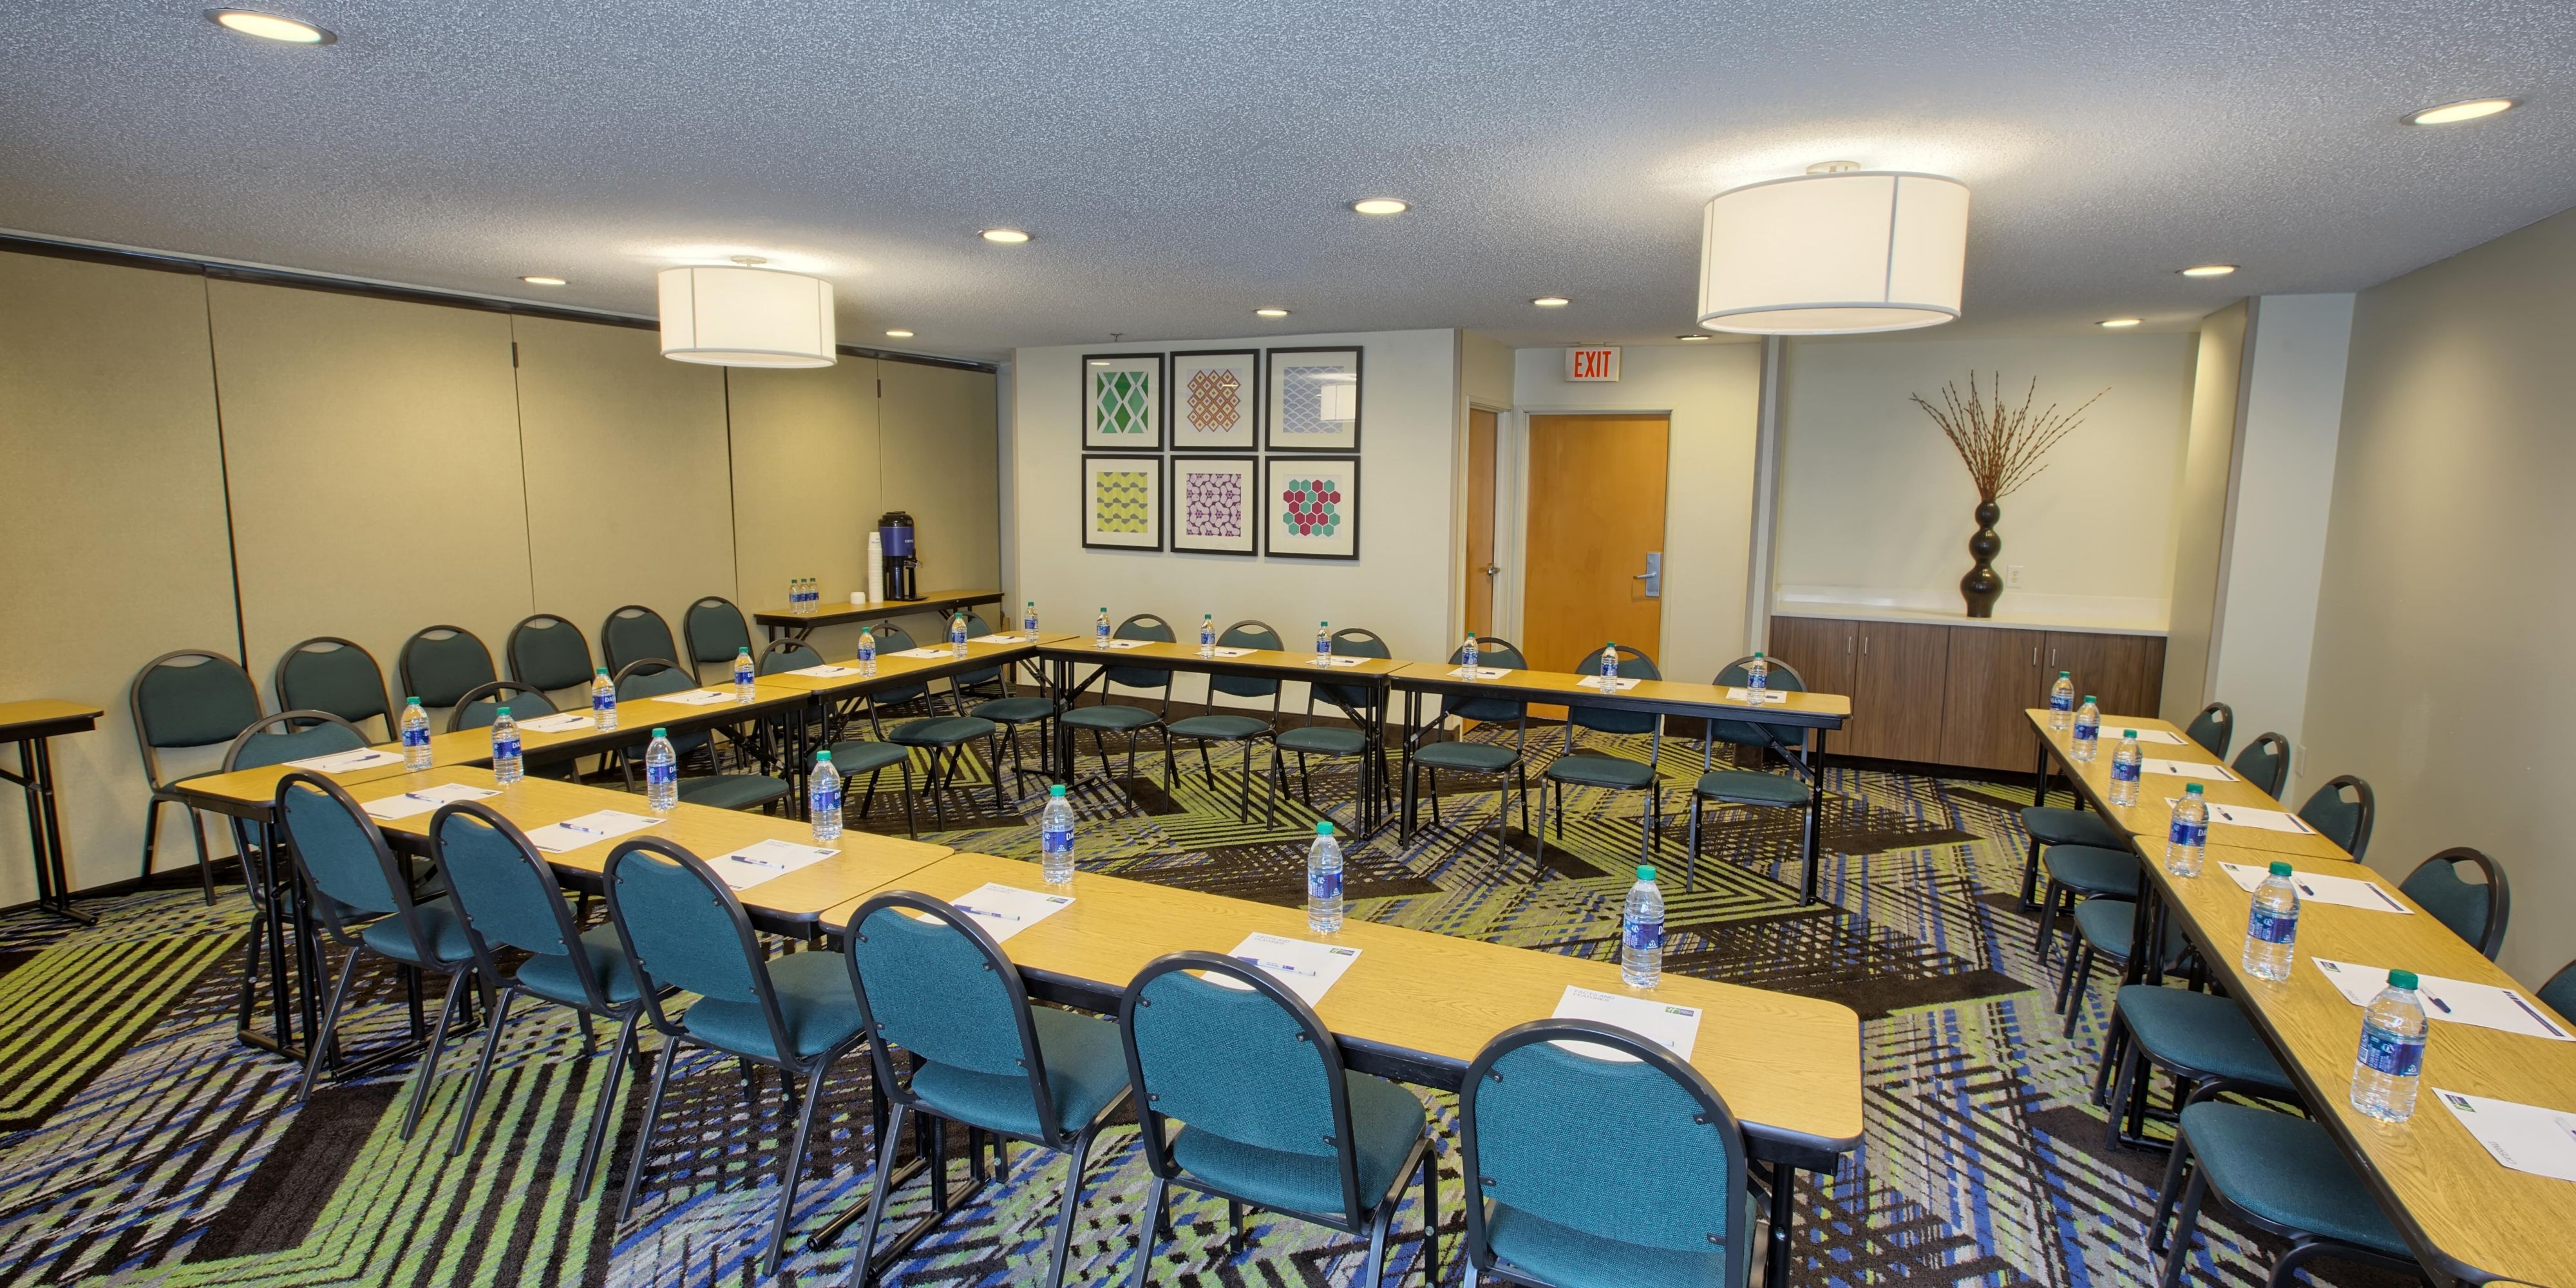 Contact the hotel to plan your next meeting or event. 